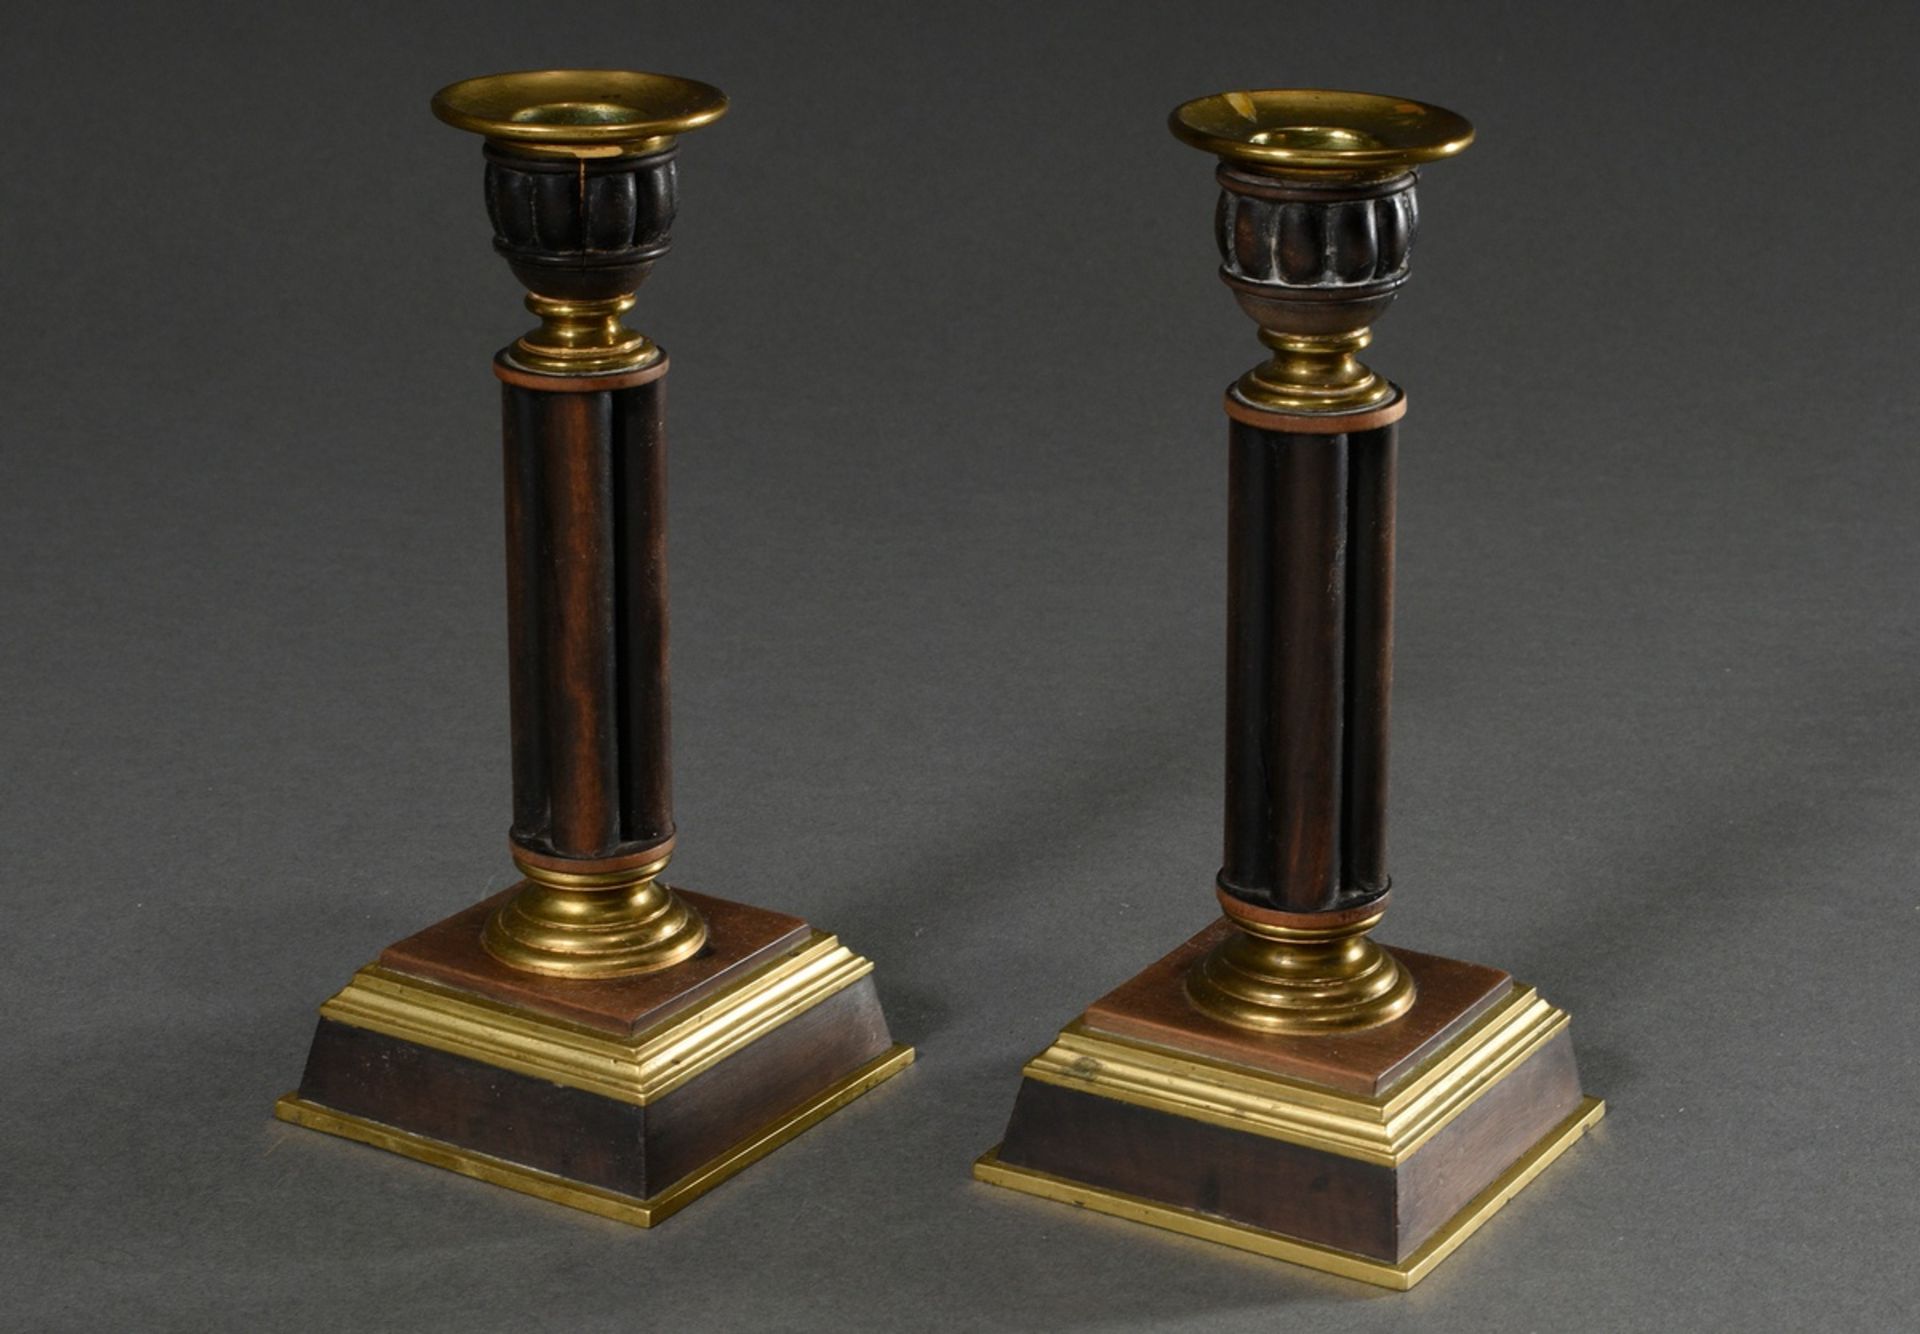 Pair of historicism candlesticks with carved spouts, shafts and feet in brass mounts, probably Engl